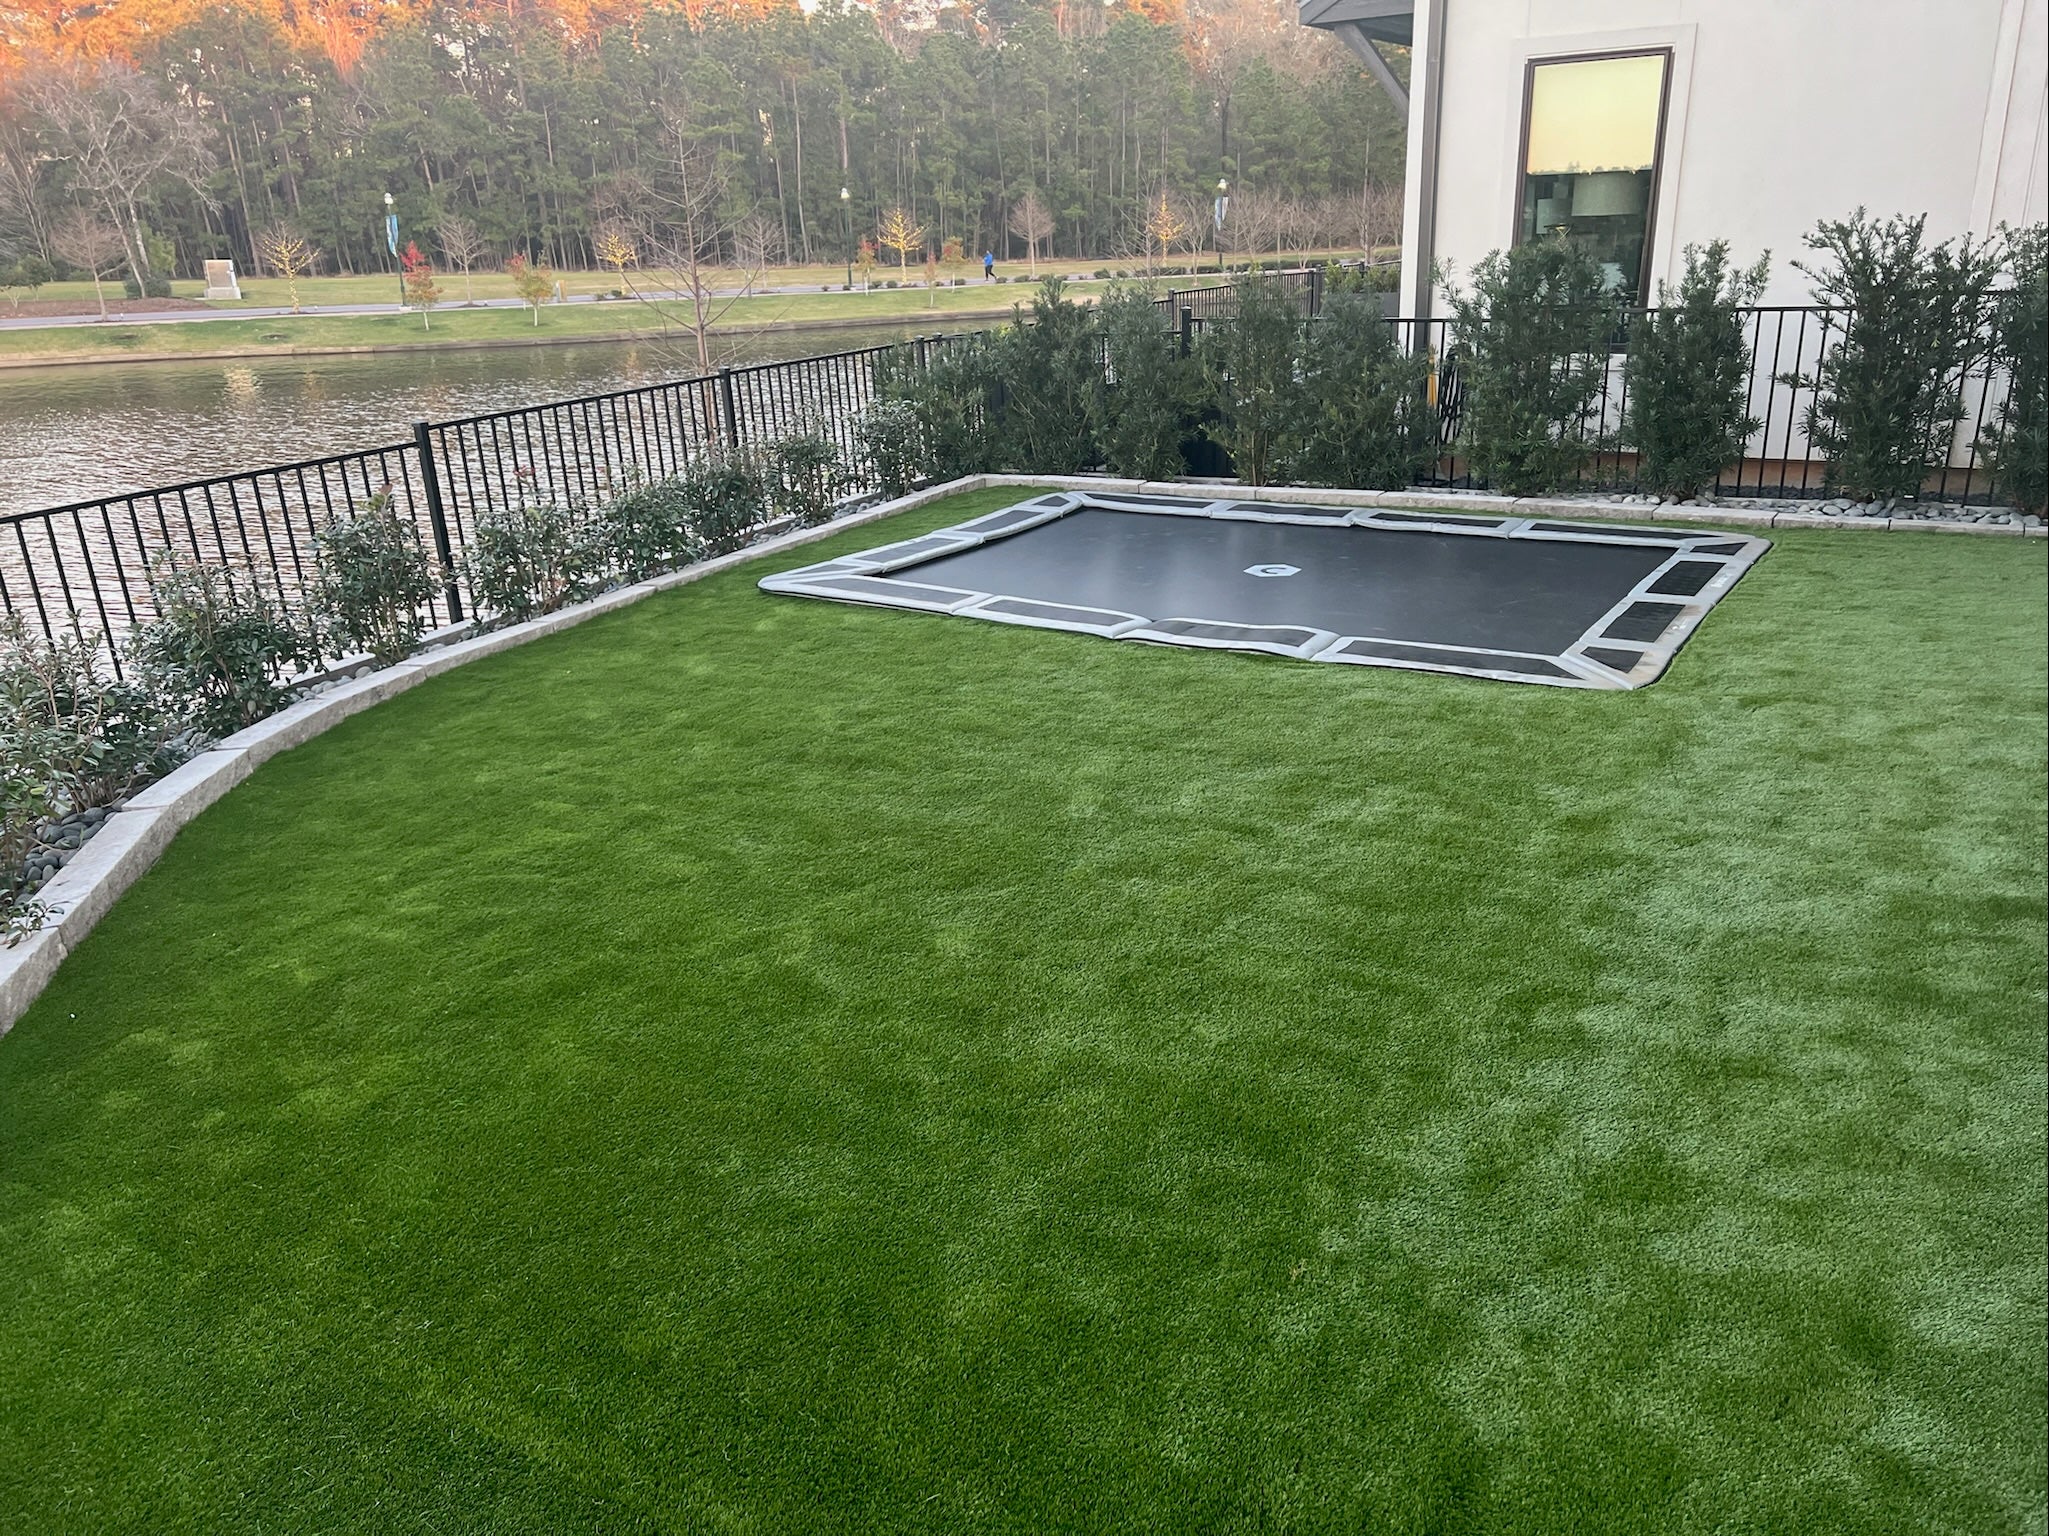 Lake Woodlands - Turf and In-Ground Trampoline - Recreation Pro